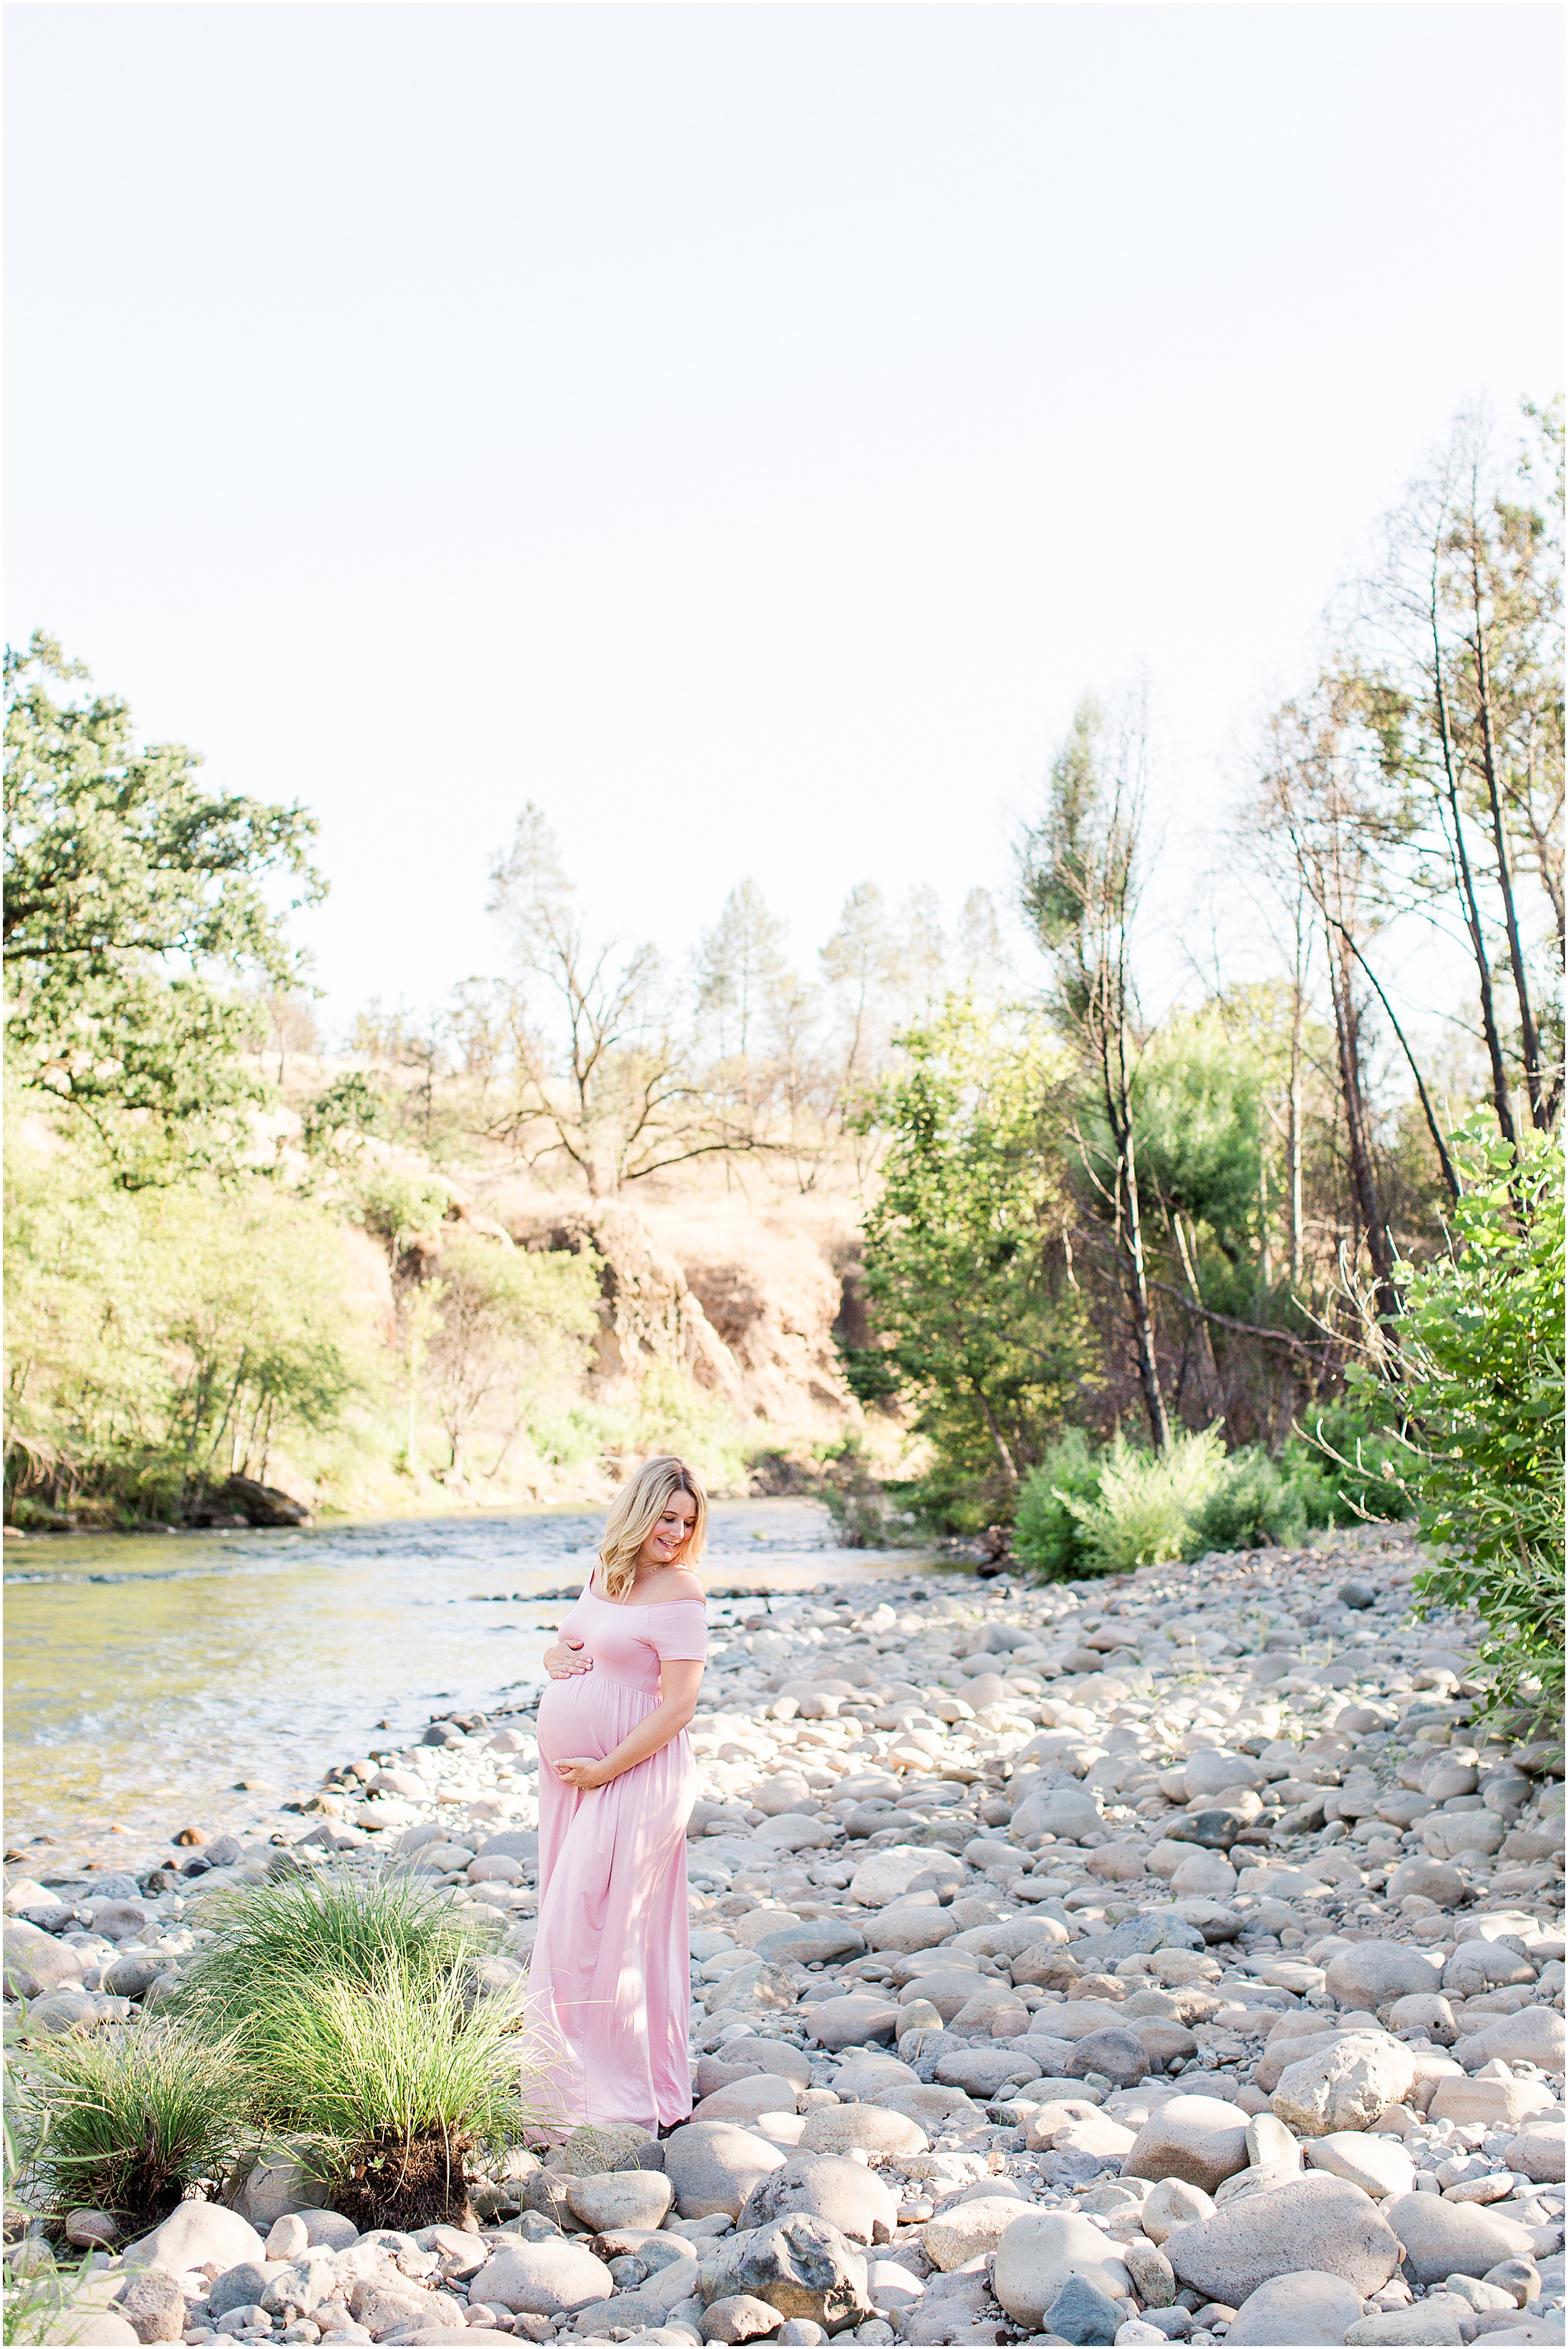 Butte Creek Canyon Maternity Session Family,